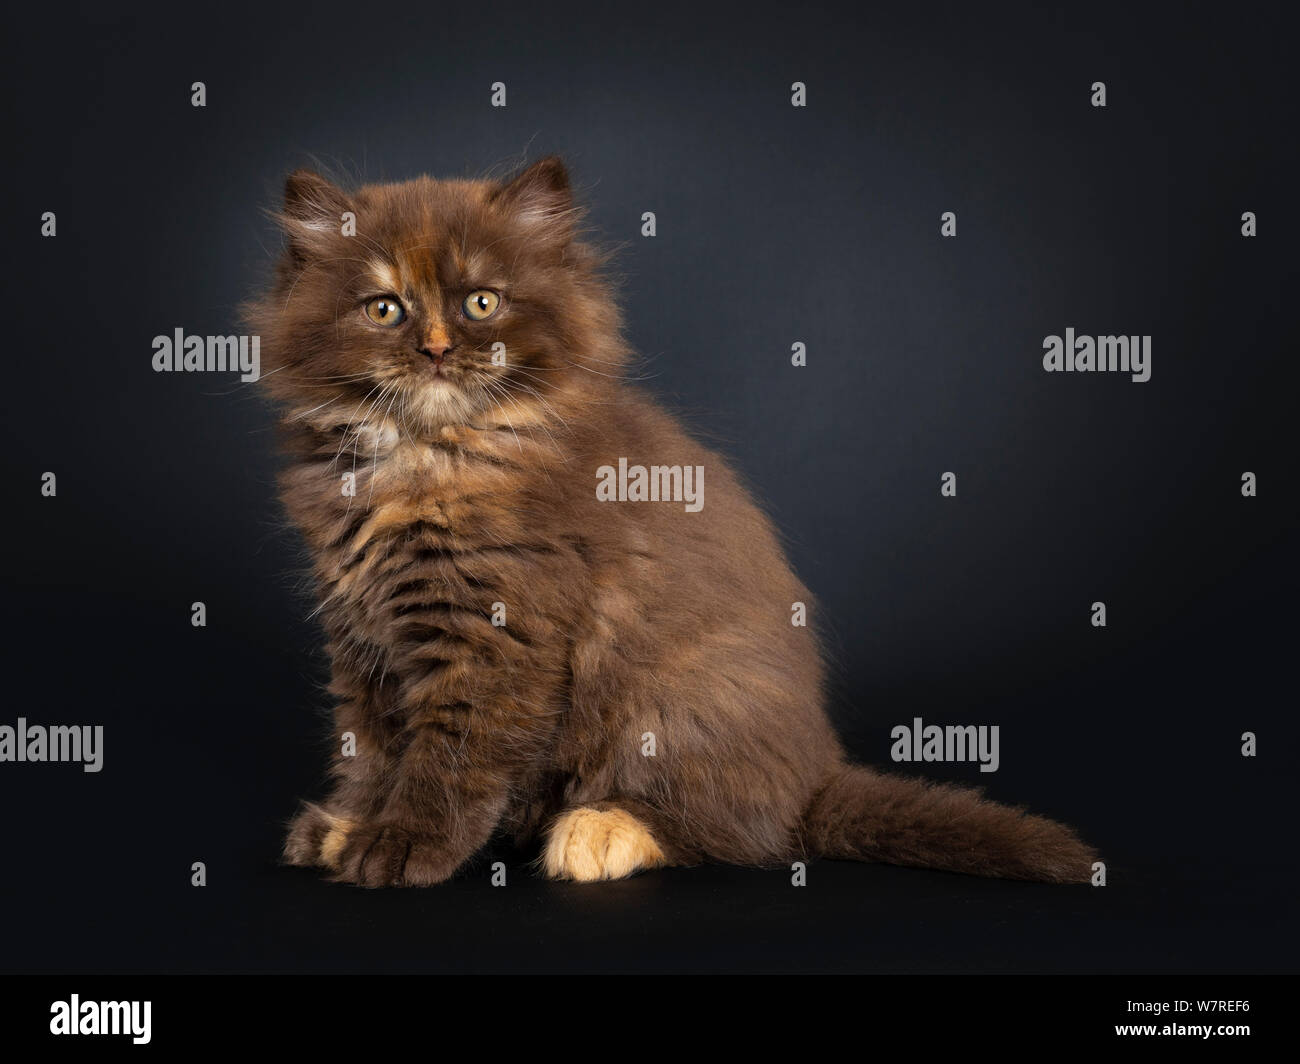 Cute brown tortie British Longhair cat kitten, sitting side ways. Looking at camera with developping orange eyes. Isolated on black background. Stock Photo